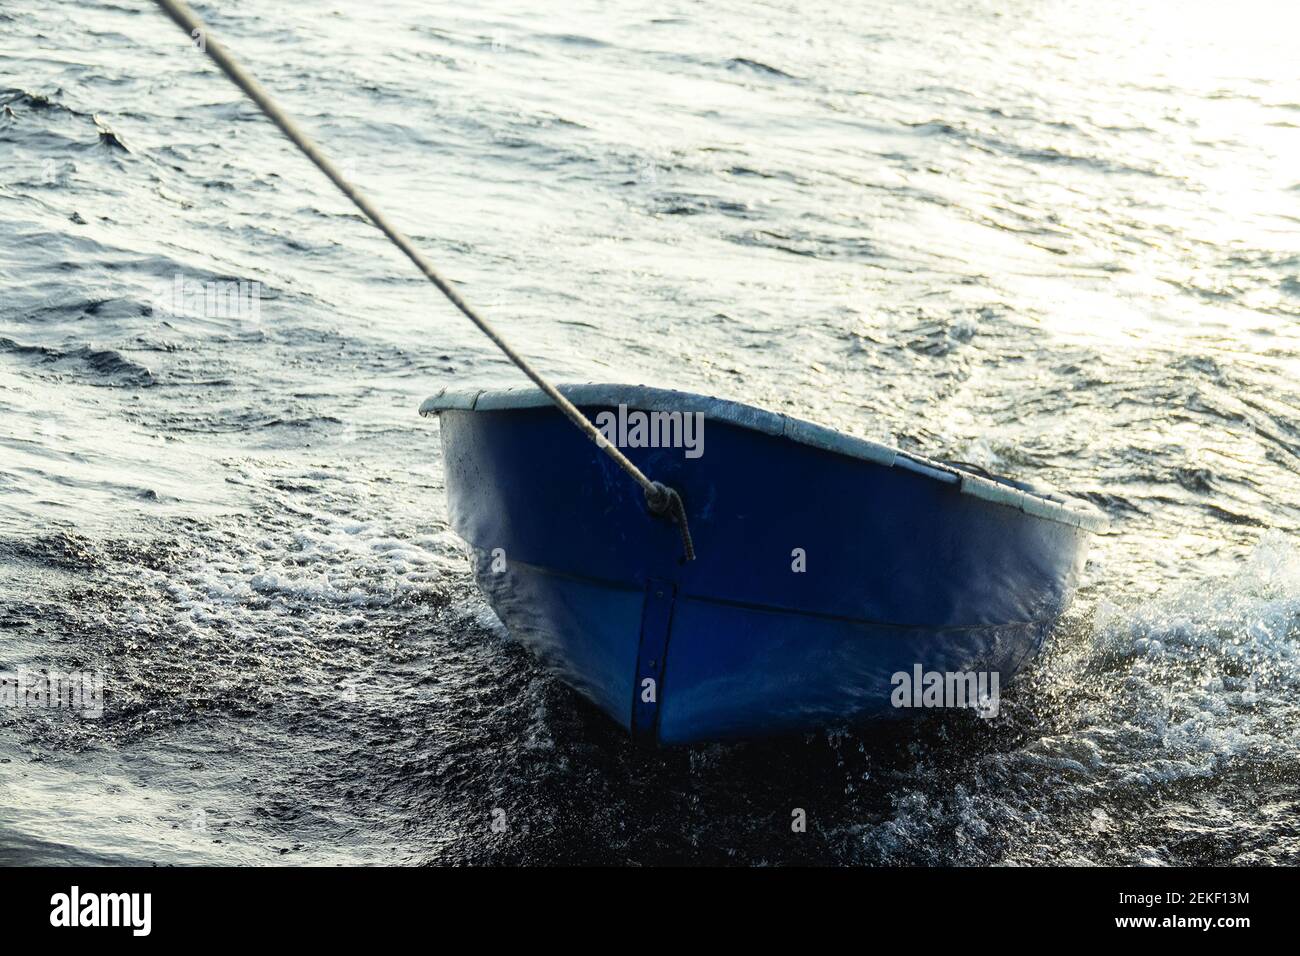 boat is tethered behind fishing schooner, on trailers, under tow Stock Photo